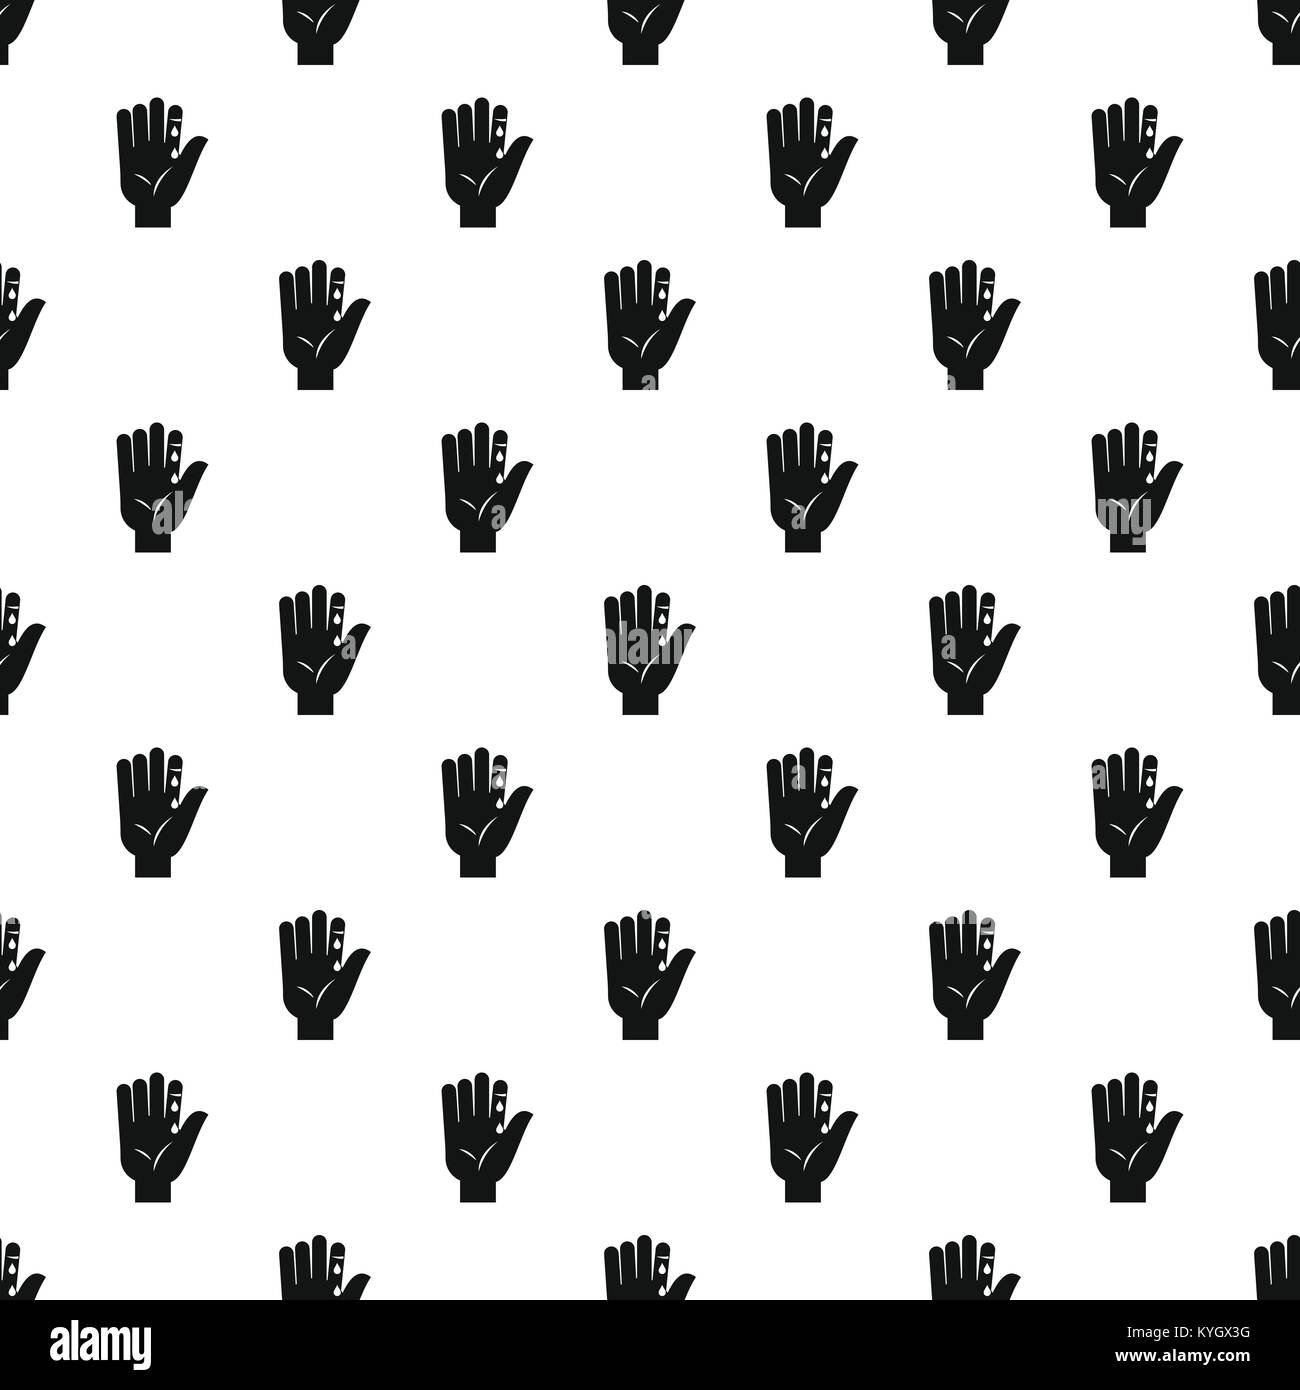 Finger with blood dripping pattern vector Stock Vector